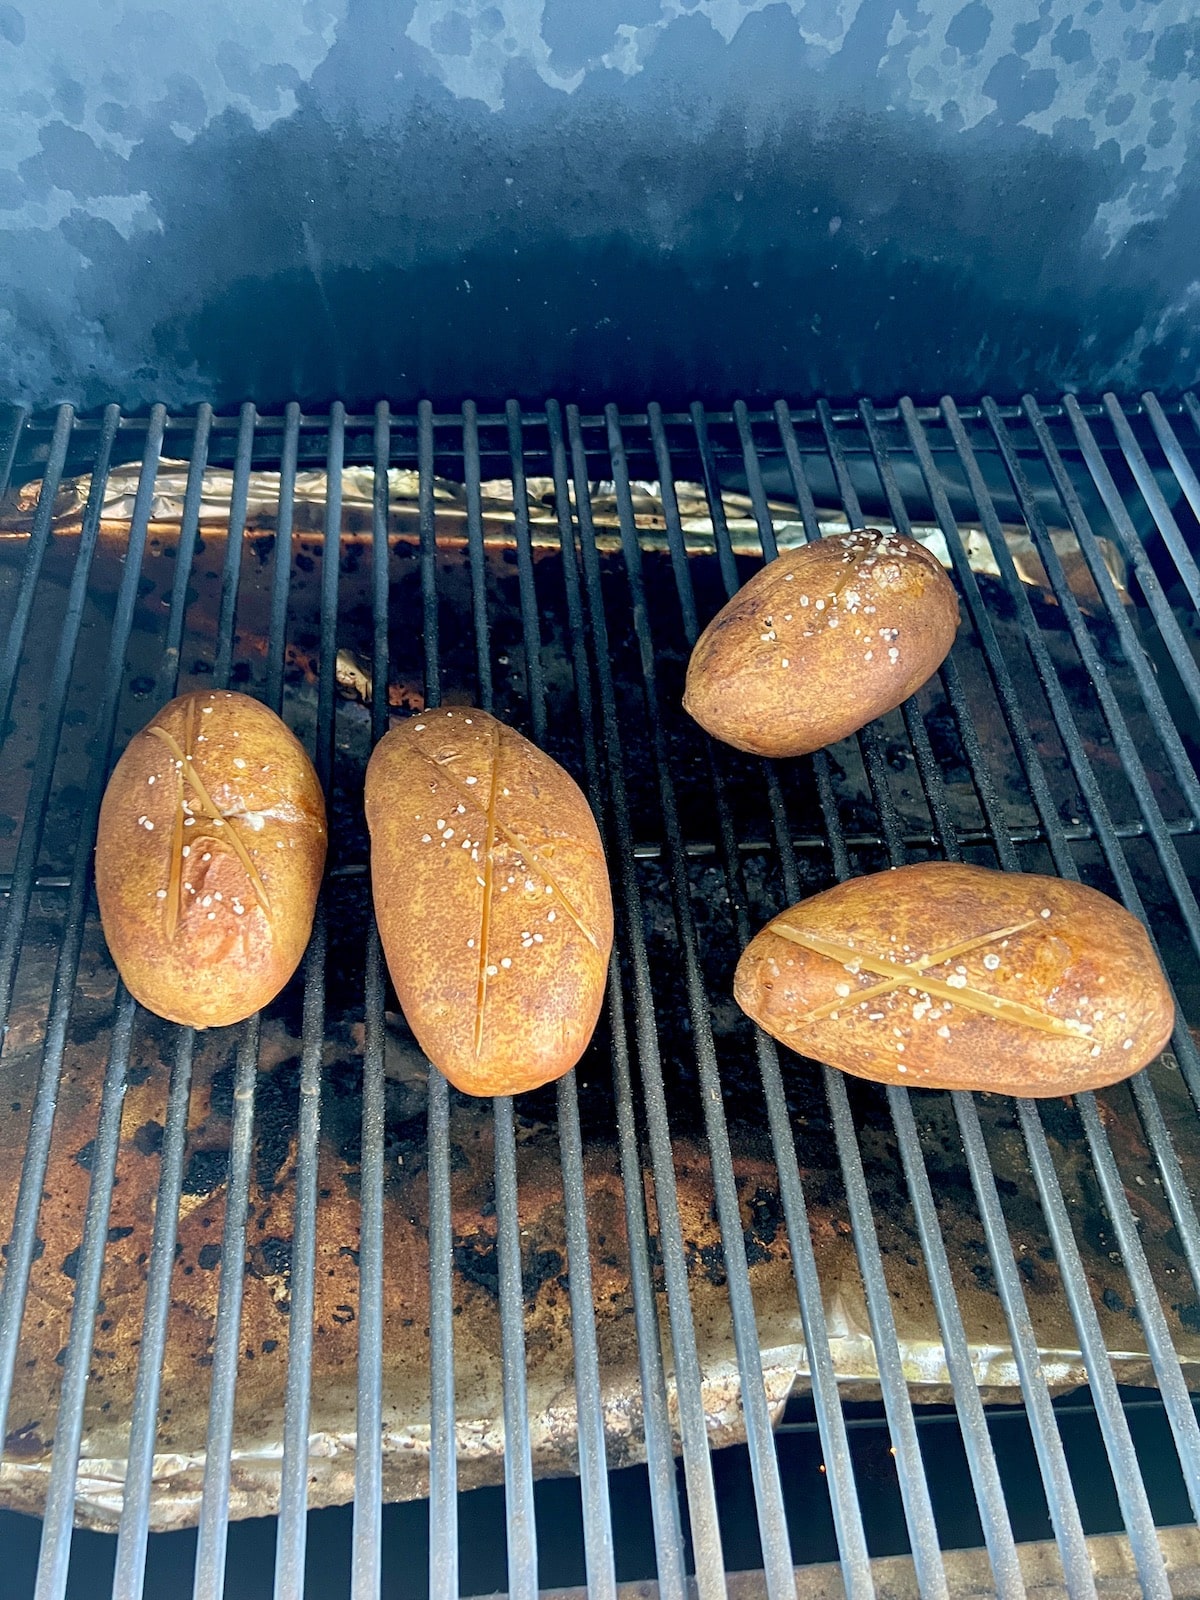 Cooking 4 baked potatoes on a pellet grill.